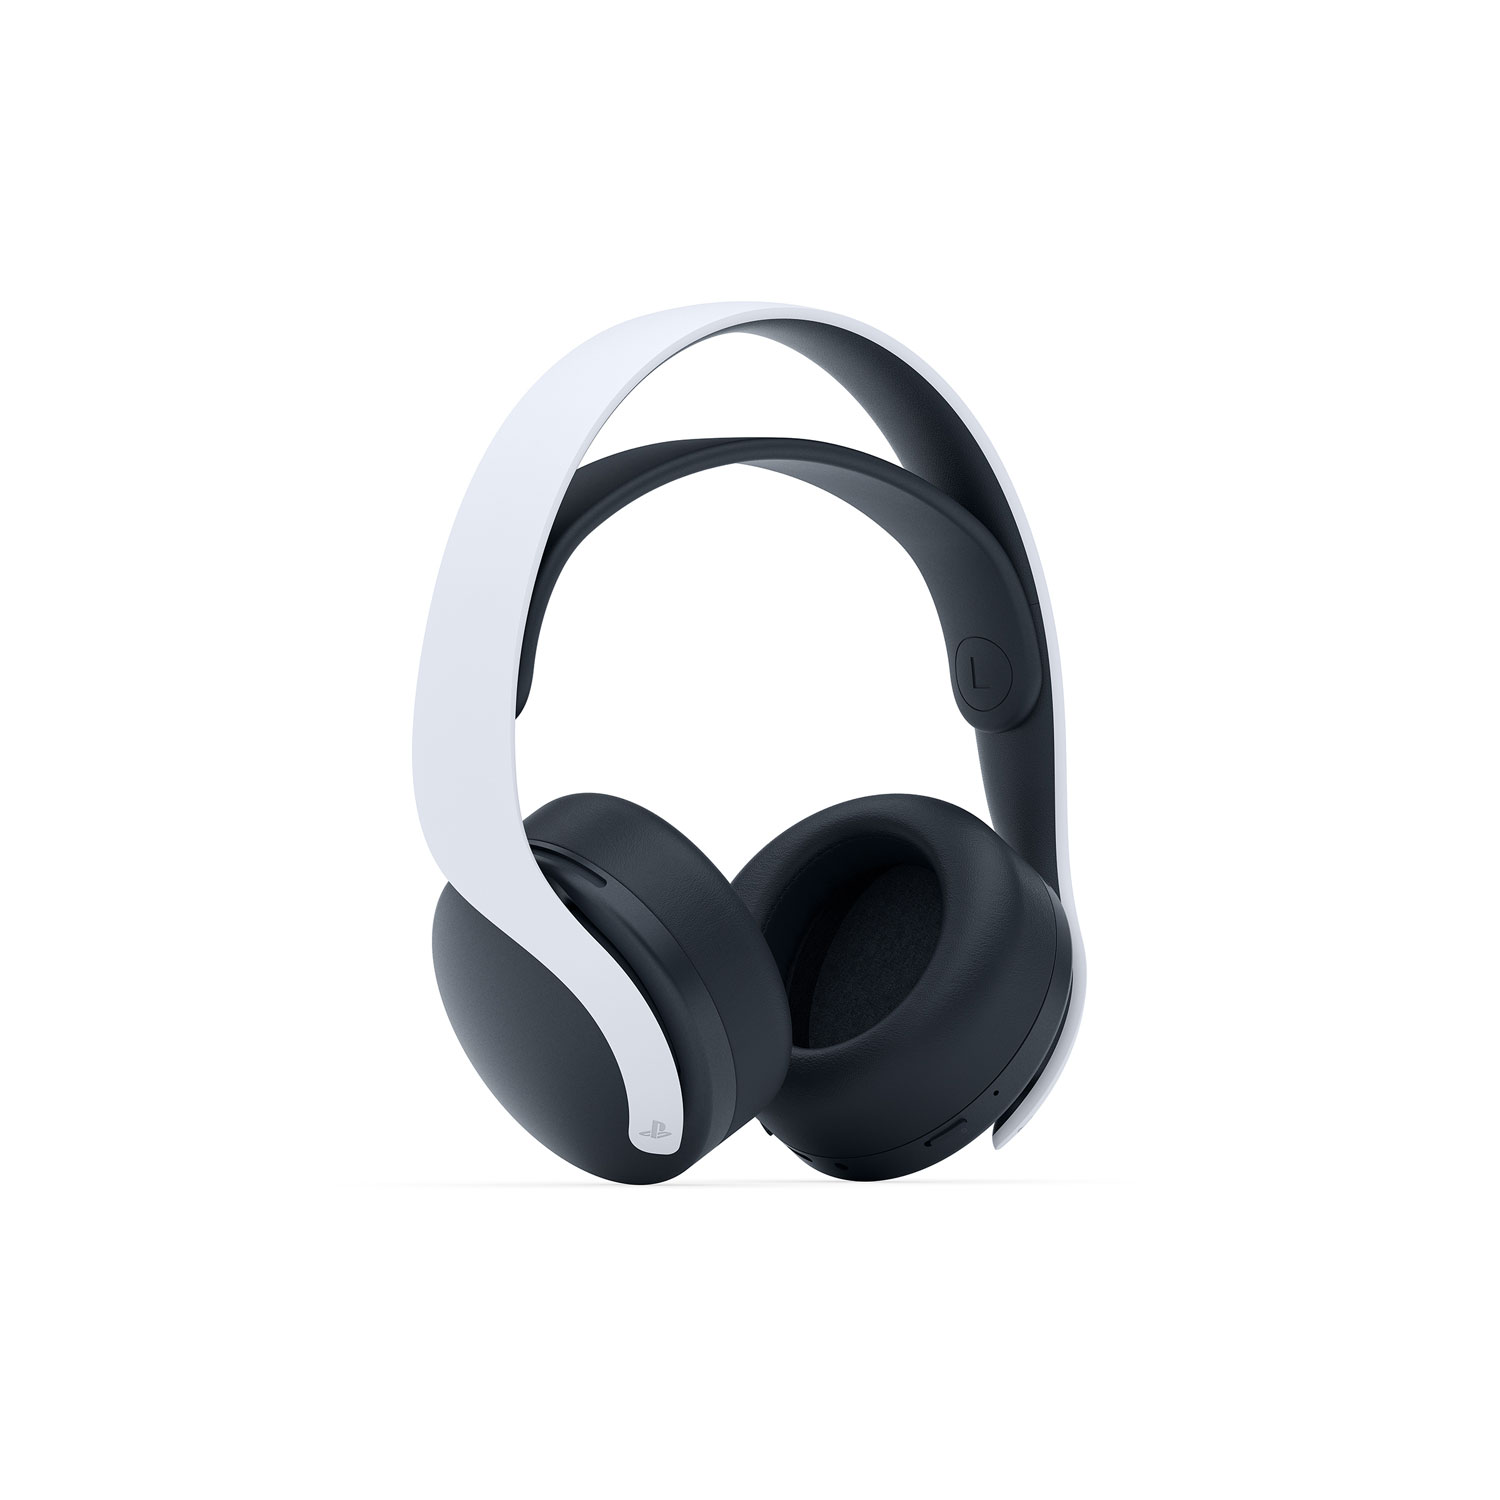 PULSE 3D Wireless Gaming Headset for PlayStation 5 - White